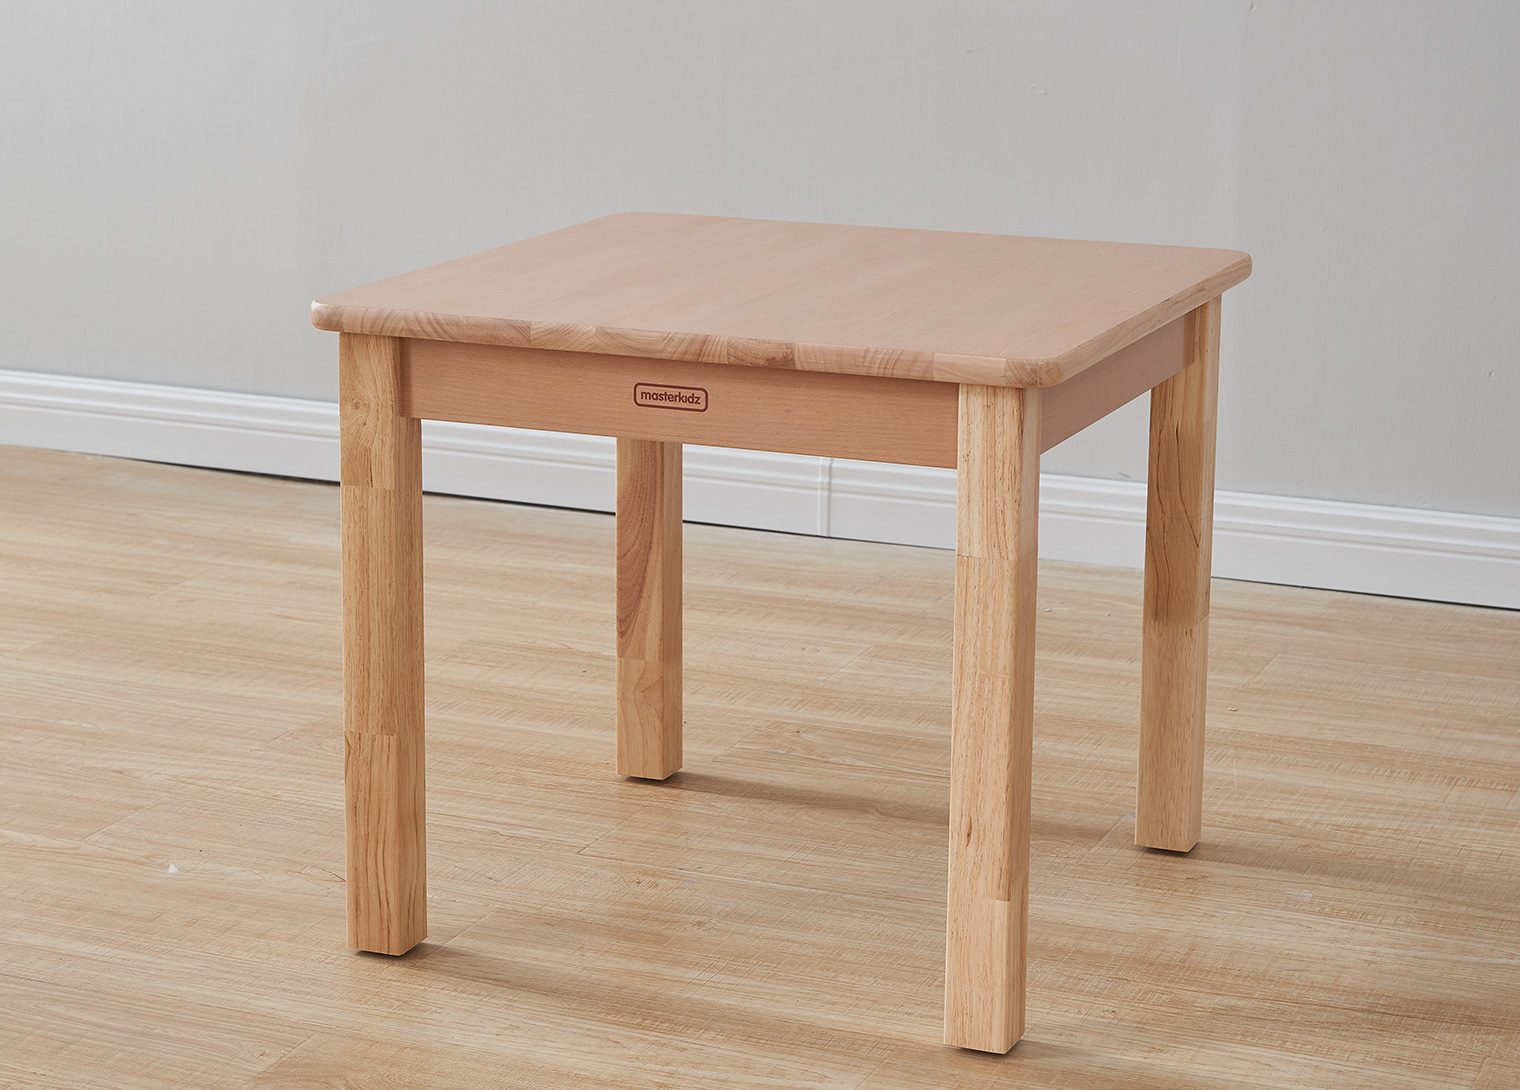 Forest School - 380H Square Table